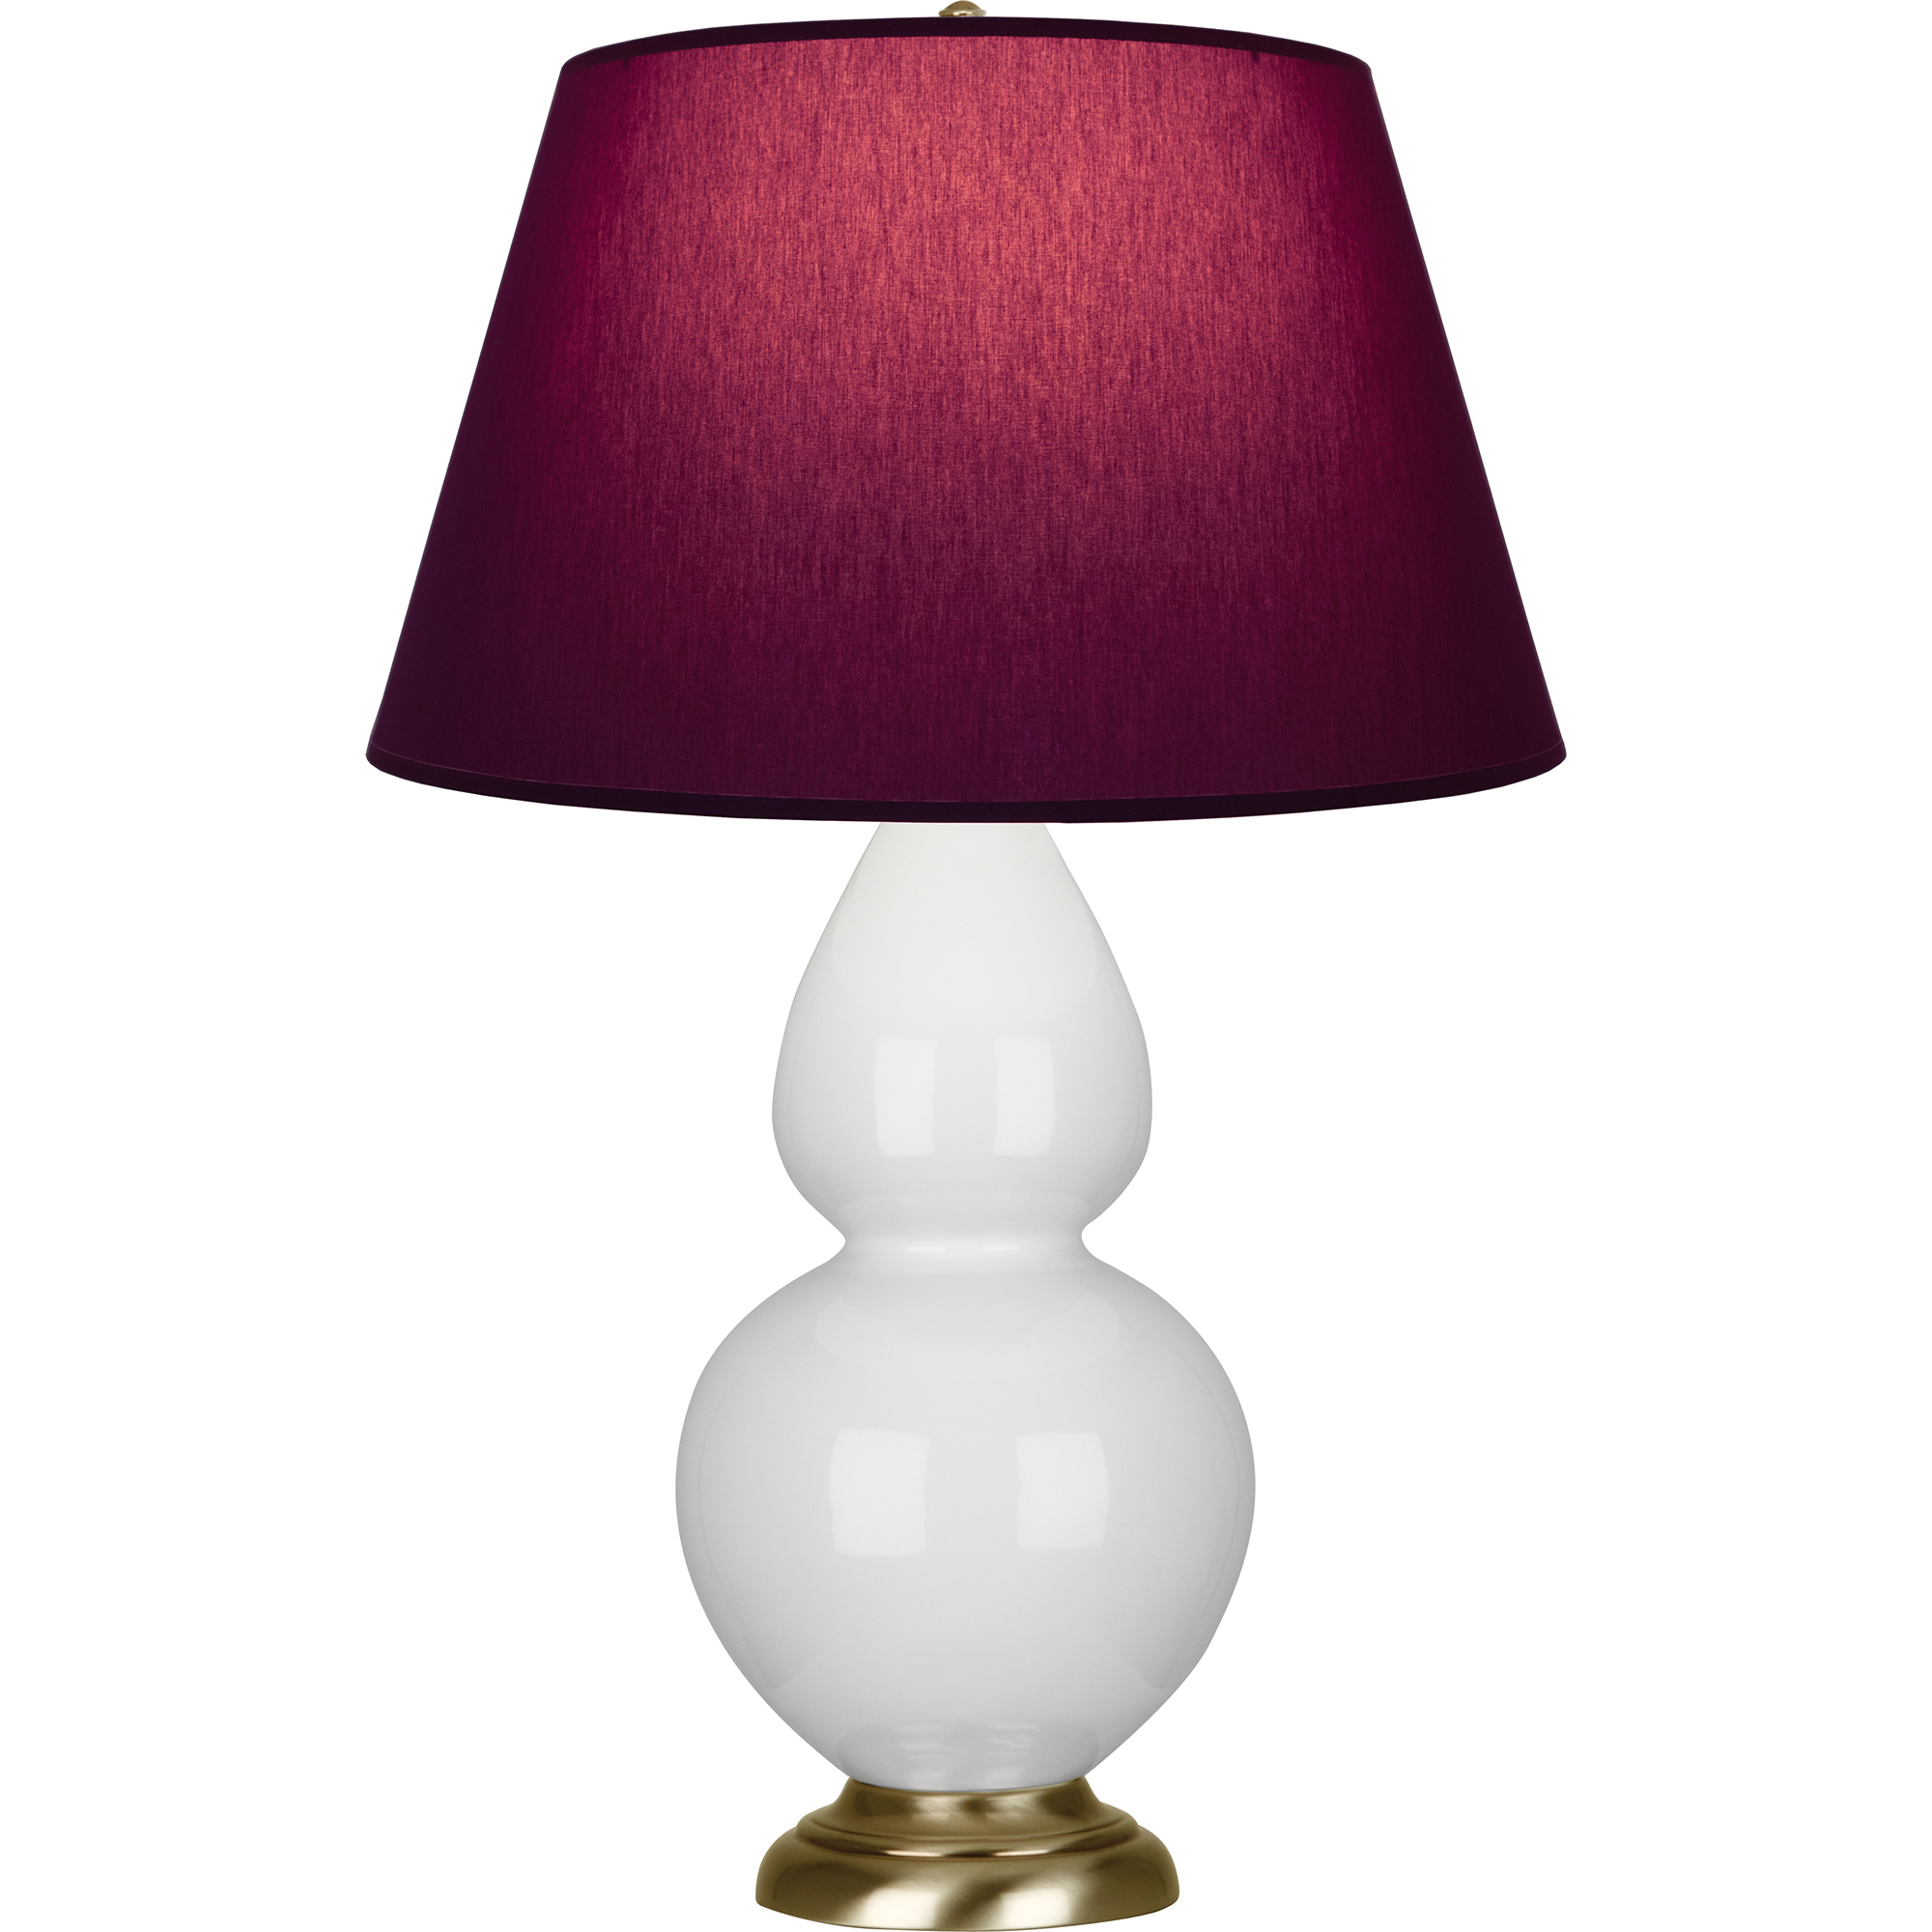 Double Gourd Table Lamp Style #1660P